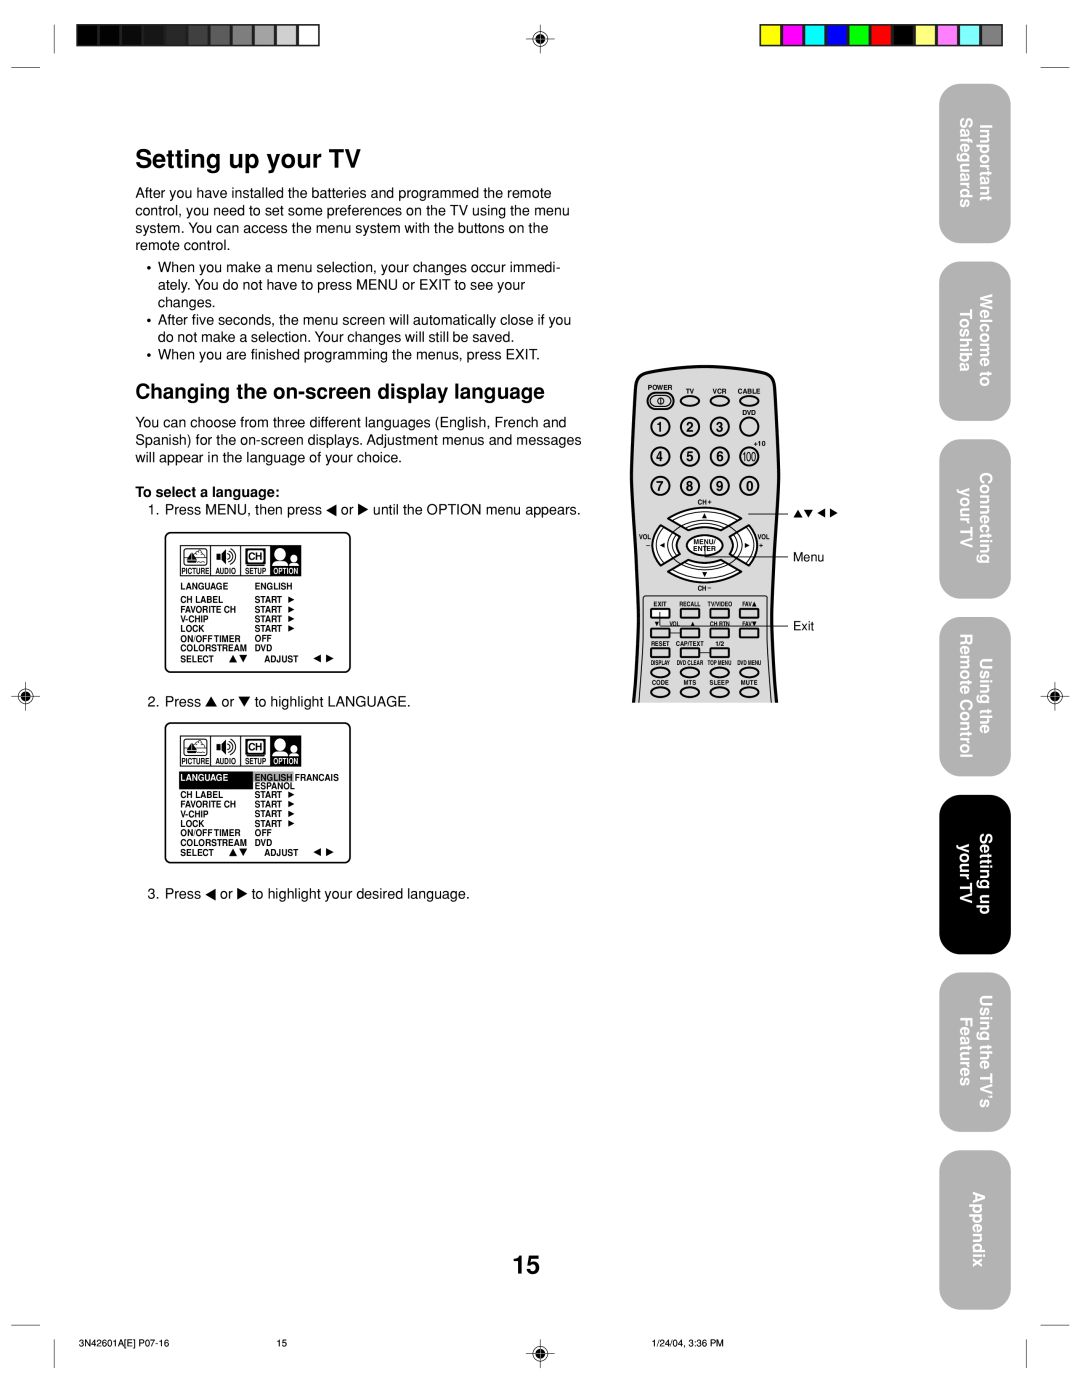 Toshiba 27A44 appendix Setting up your TV, Changing the on-screen display language, Appendix, To select a language 